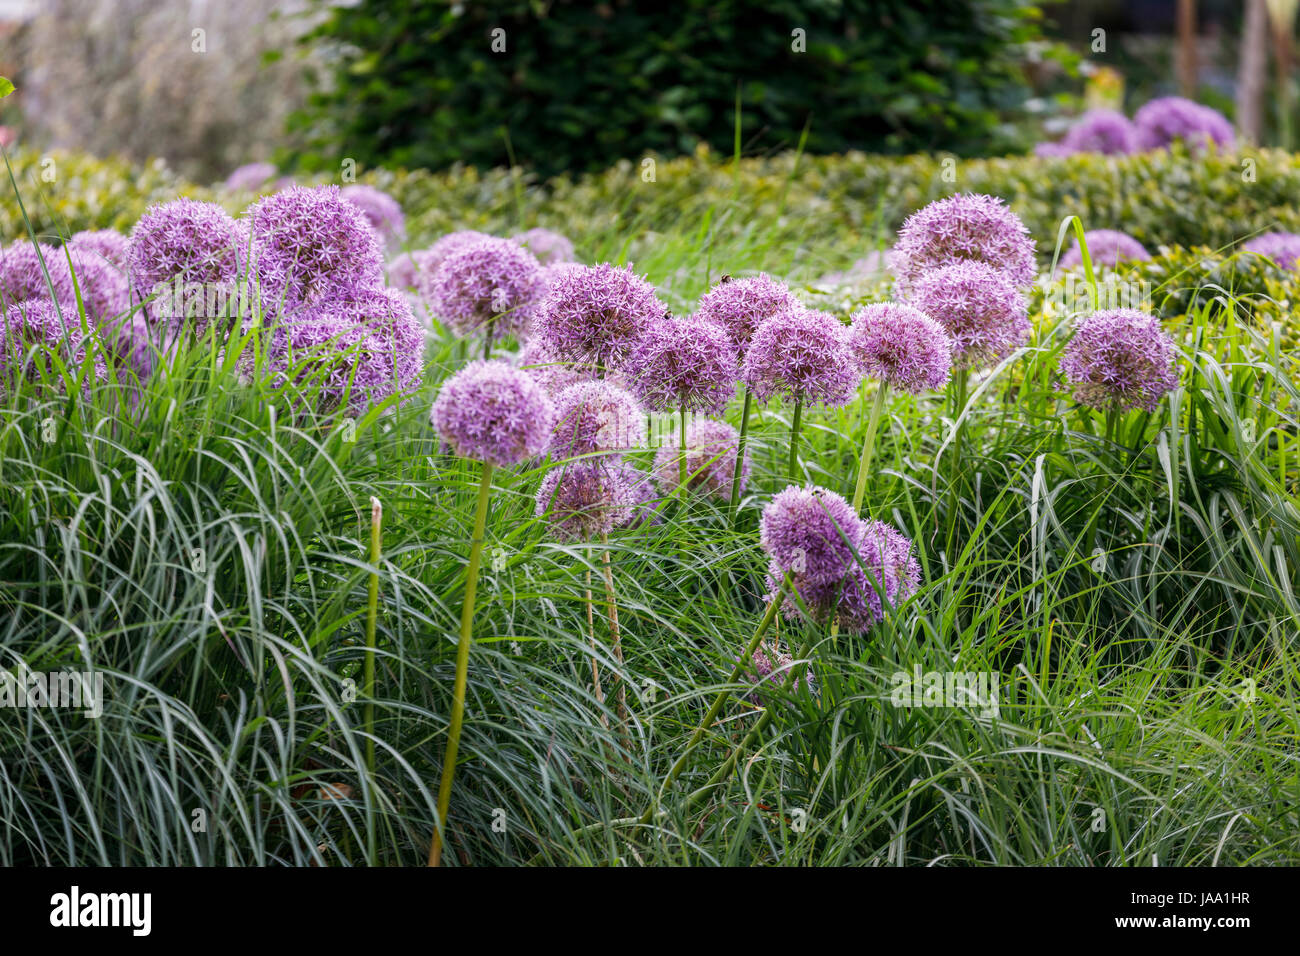 Ornamental Alliums (Allieae) growing in long grass in late spring early summer, RHS gardens Wisley, Surrey, southeast England, UK Stock Photo